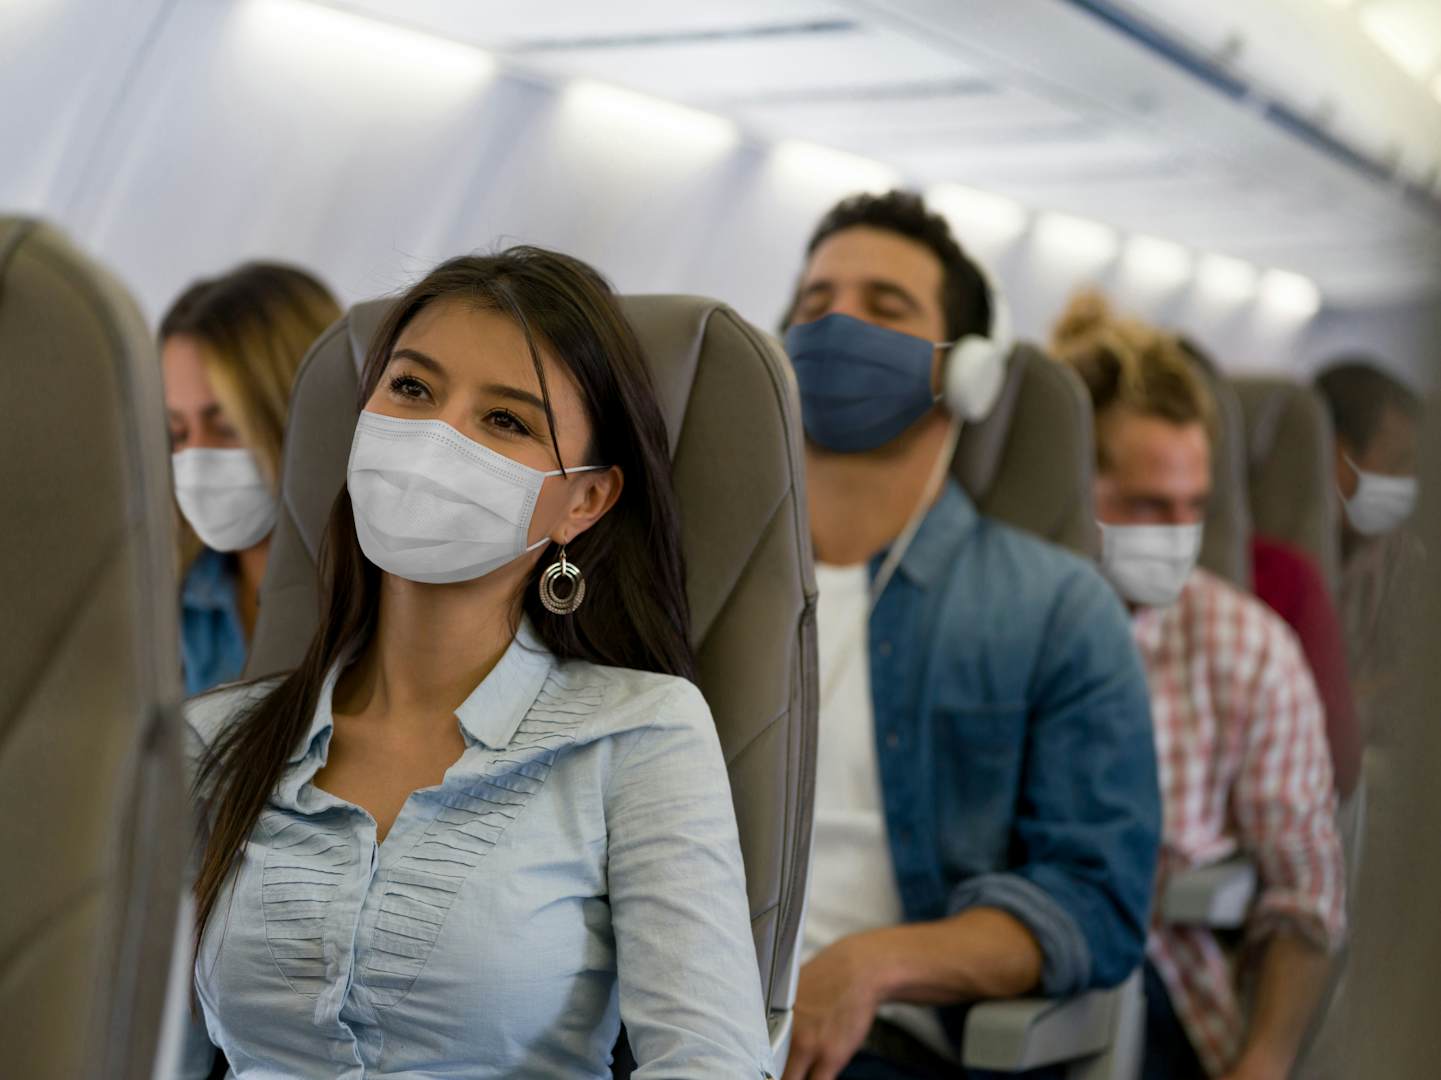 No, we shouldn't celebrate dropping mask mandates on flights. Here's why